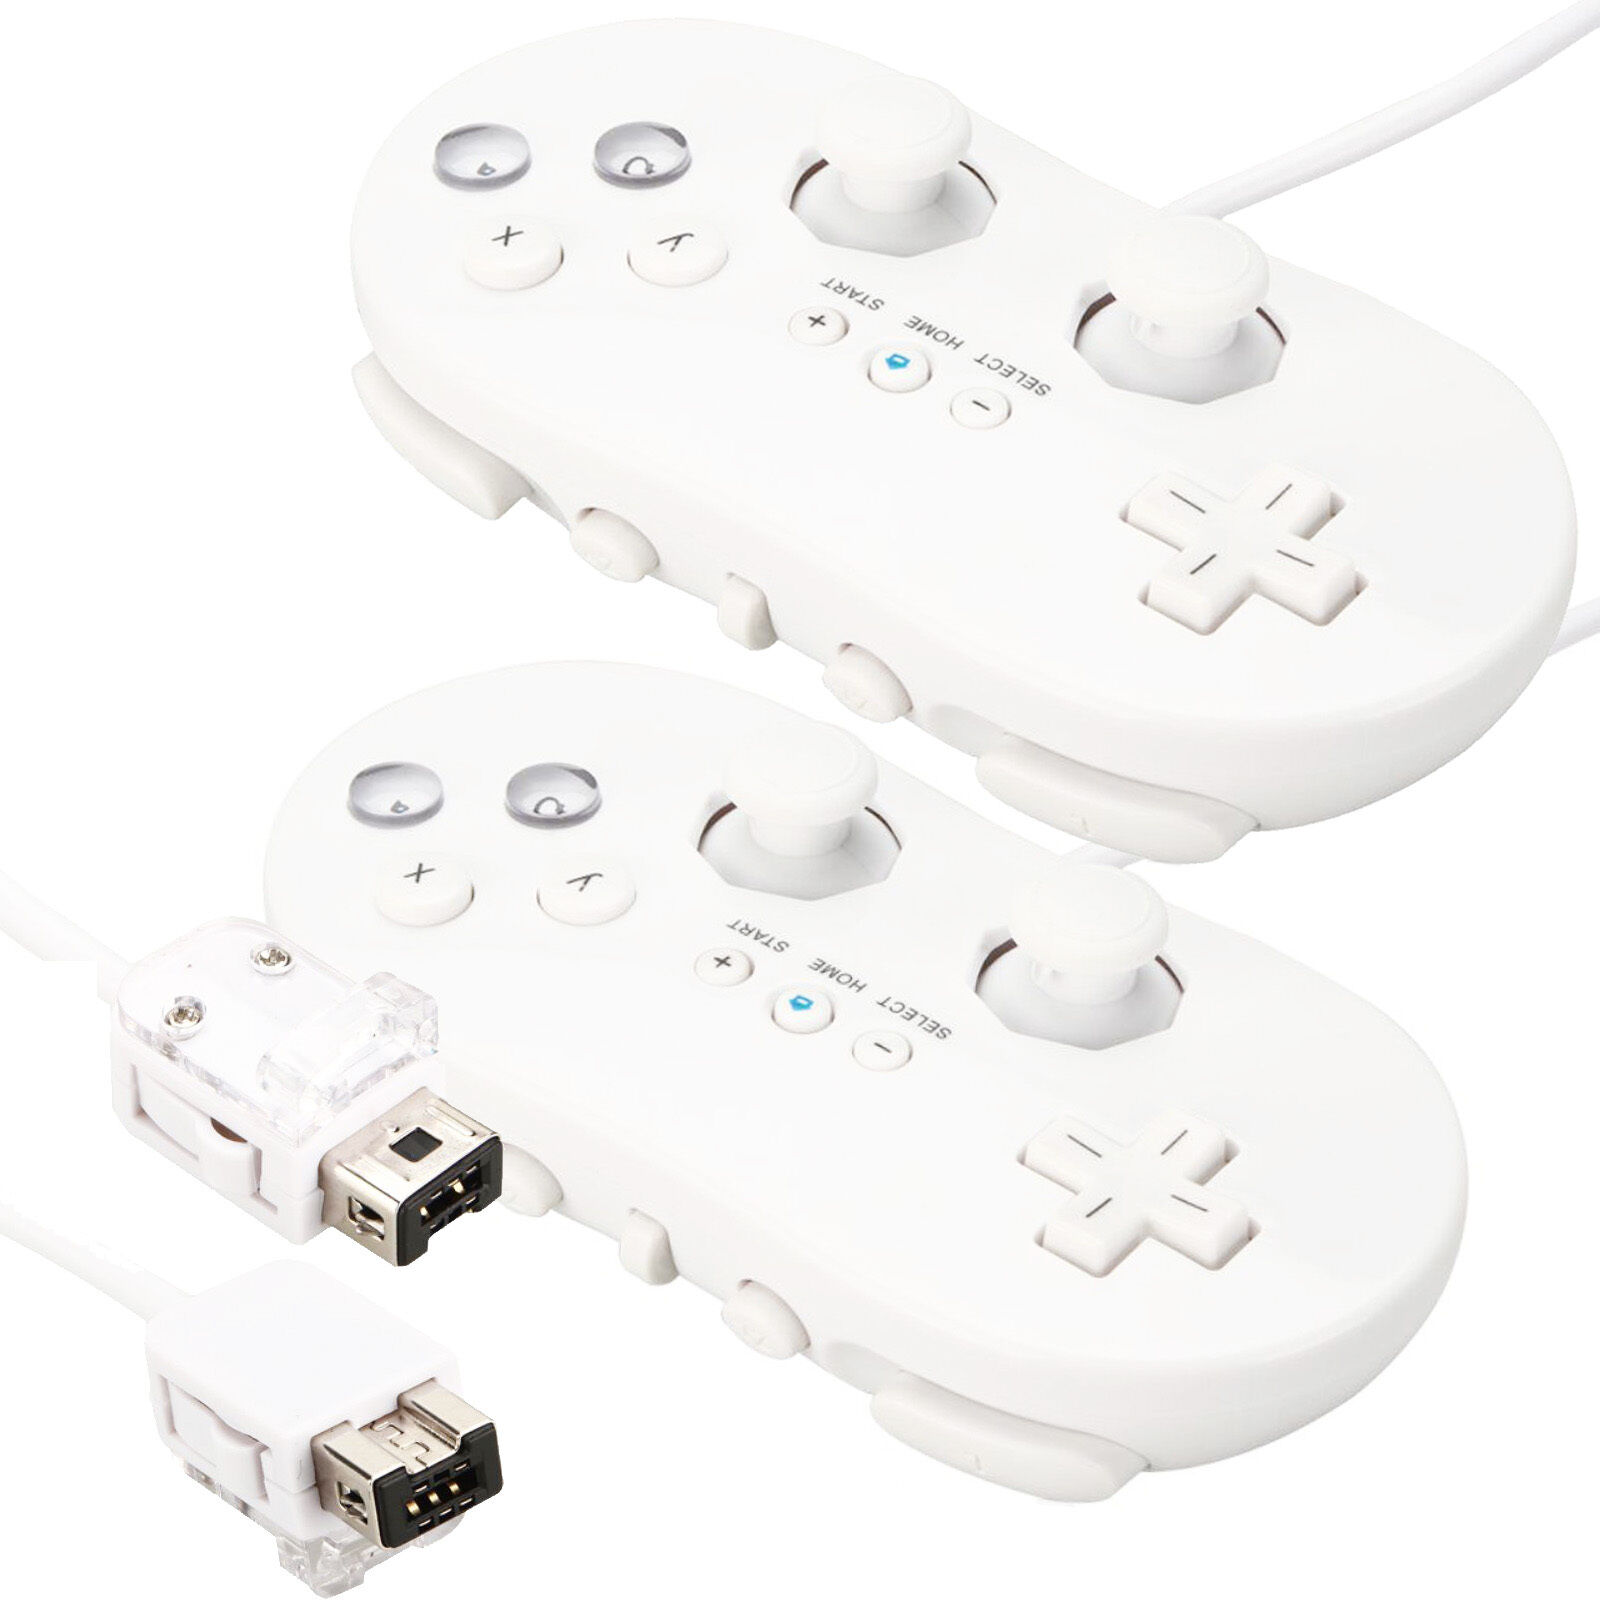 2 Wired Classic Controller For Nintendo Wii Remote White US Ship Unbranded GPCT911